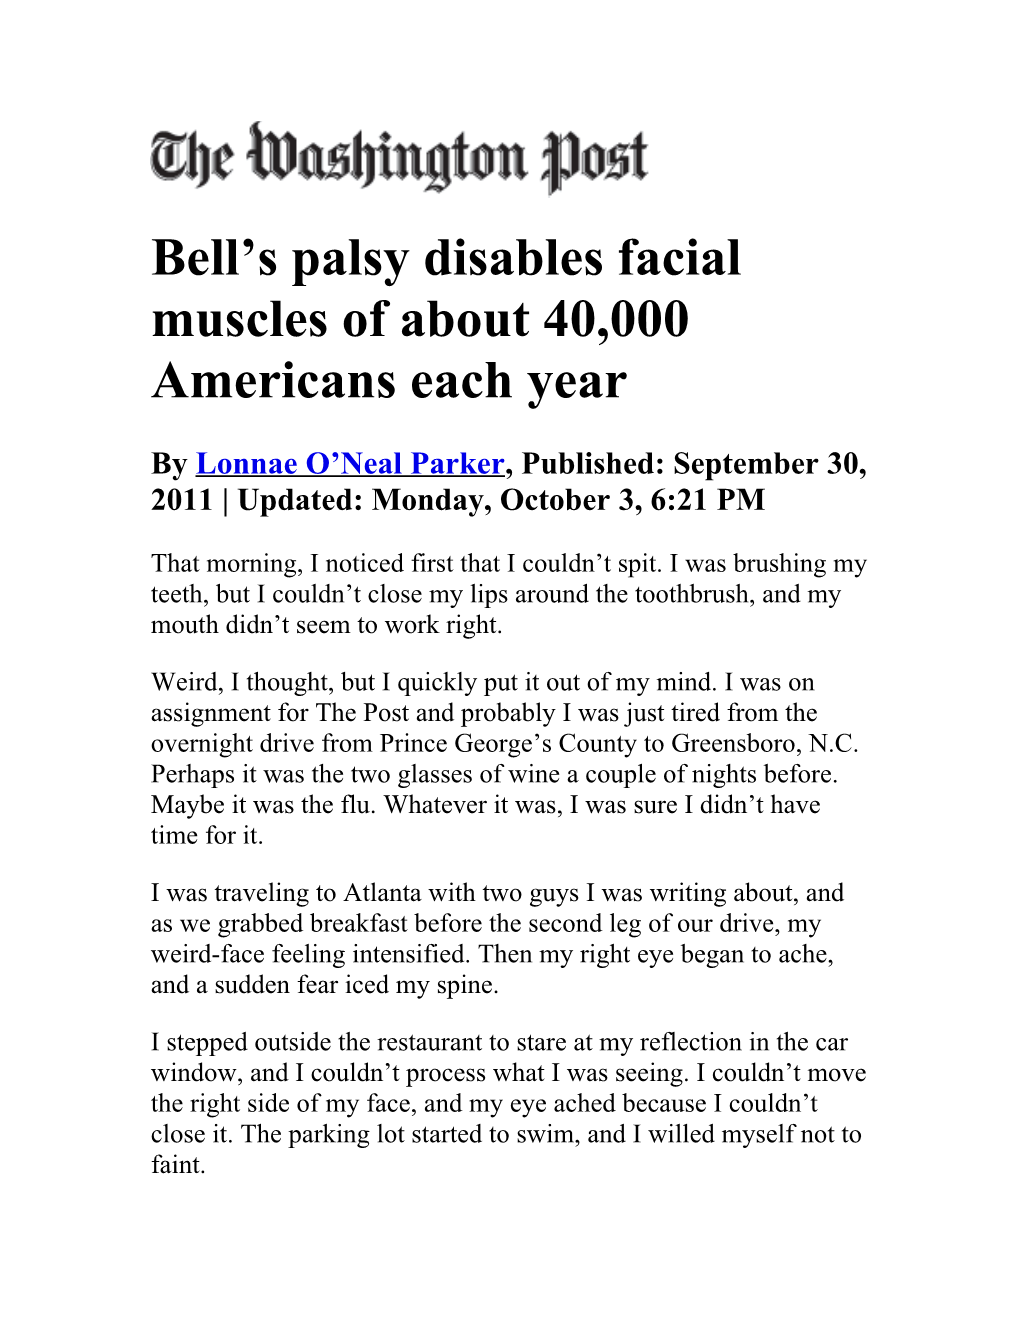 Bell S Palsy Disables Facial Muscles of About 40,000 Americans Each Year